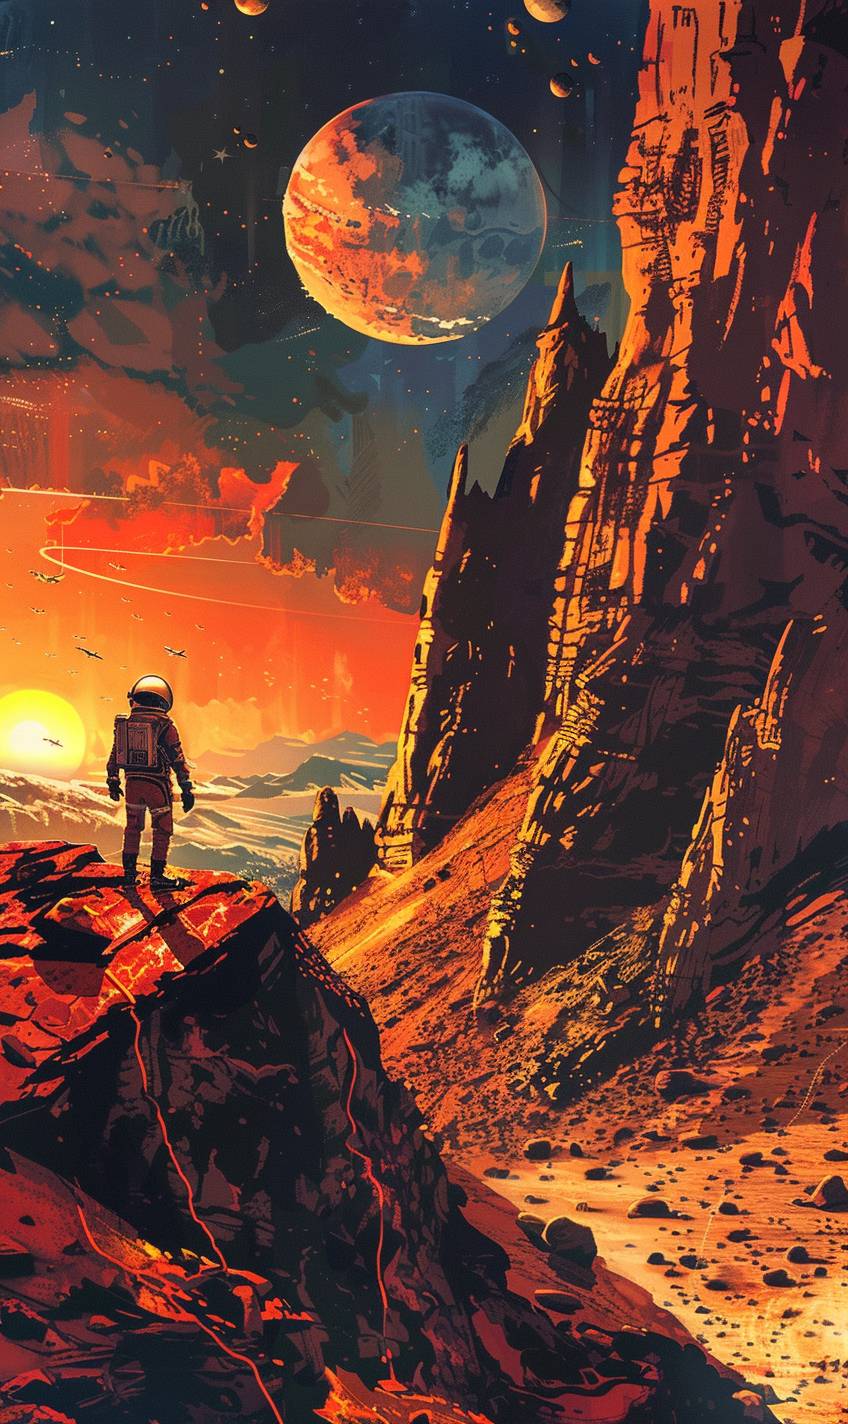 Astronauts on Mars, red alien landscape, massive sunset, giant planets in sky, steep rock formations, reflective visors, space exploration, high contrast, digital art, vivid colors, long shadows, solitary, serene, hyper-realistic watercolor painting, graphic novel style